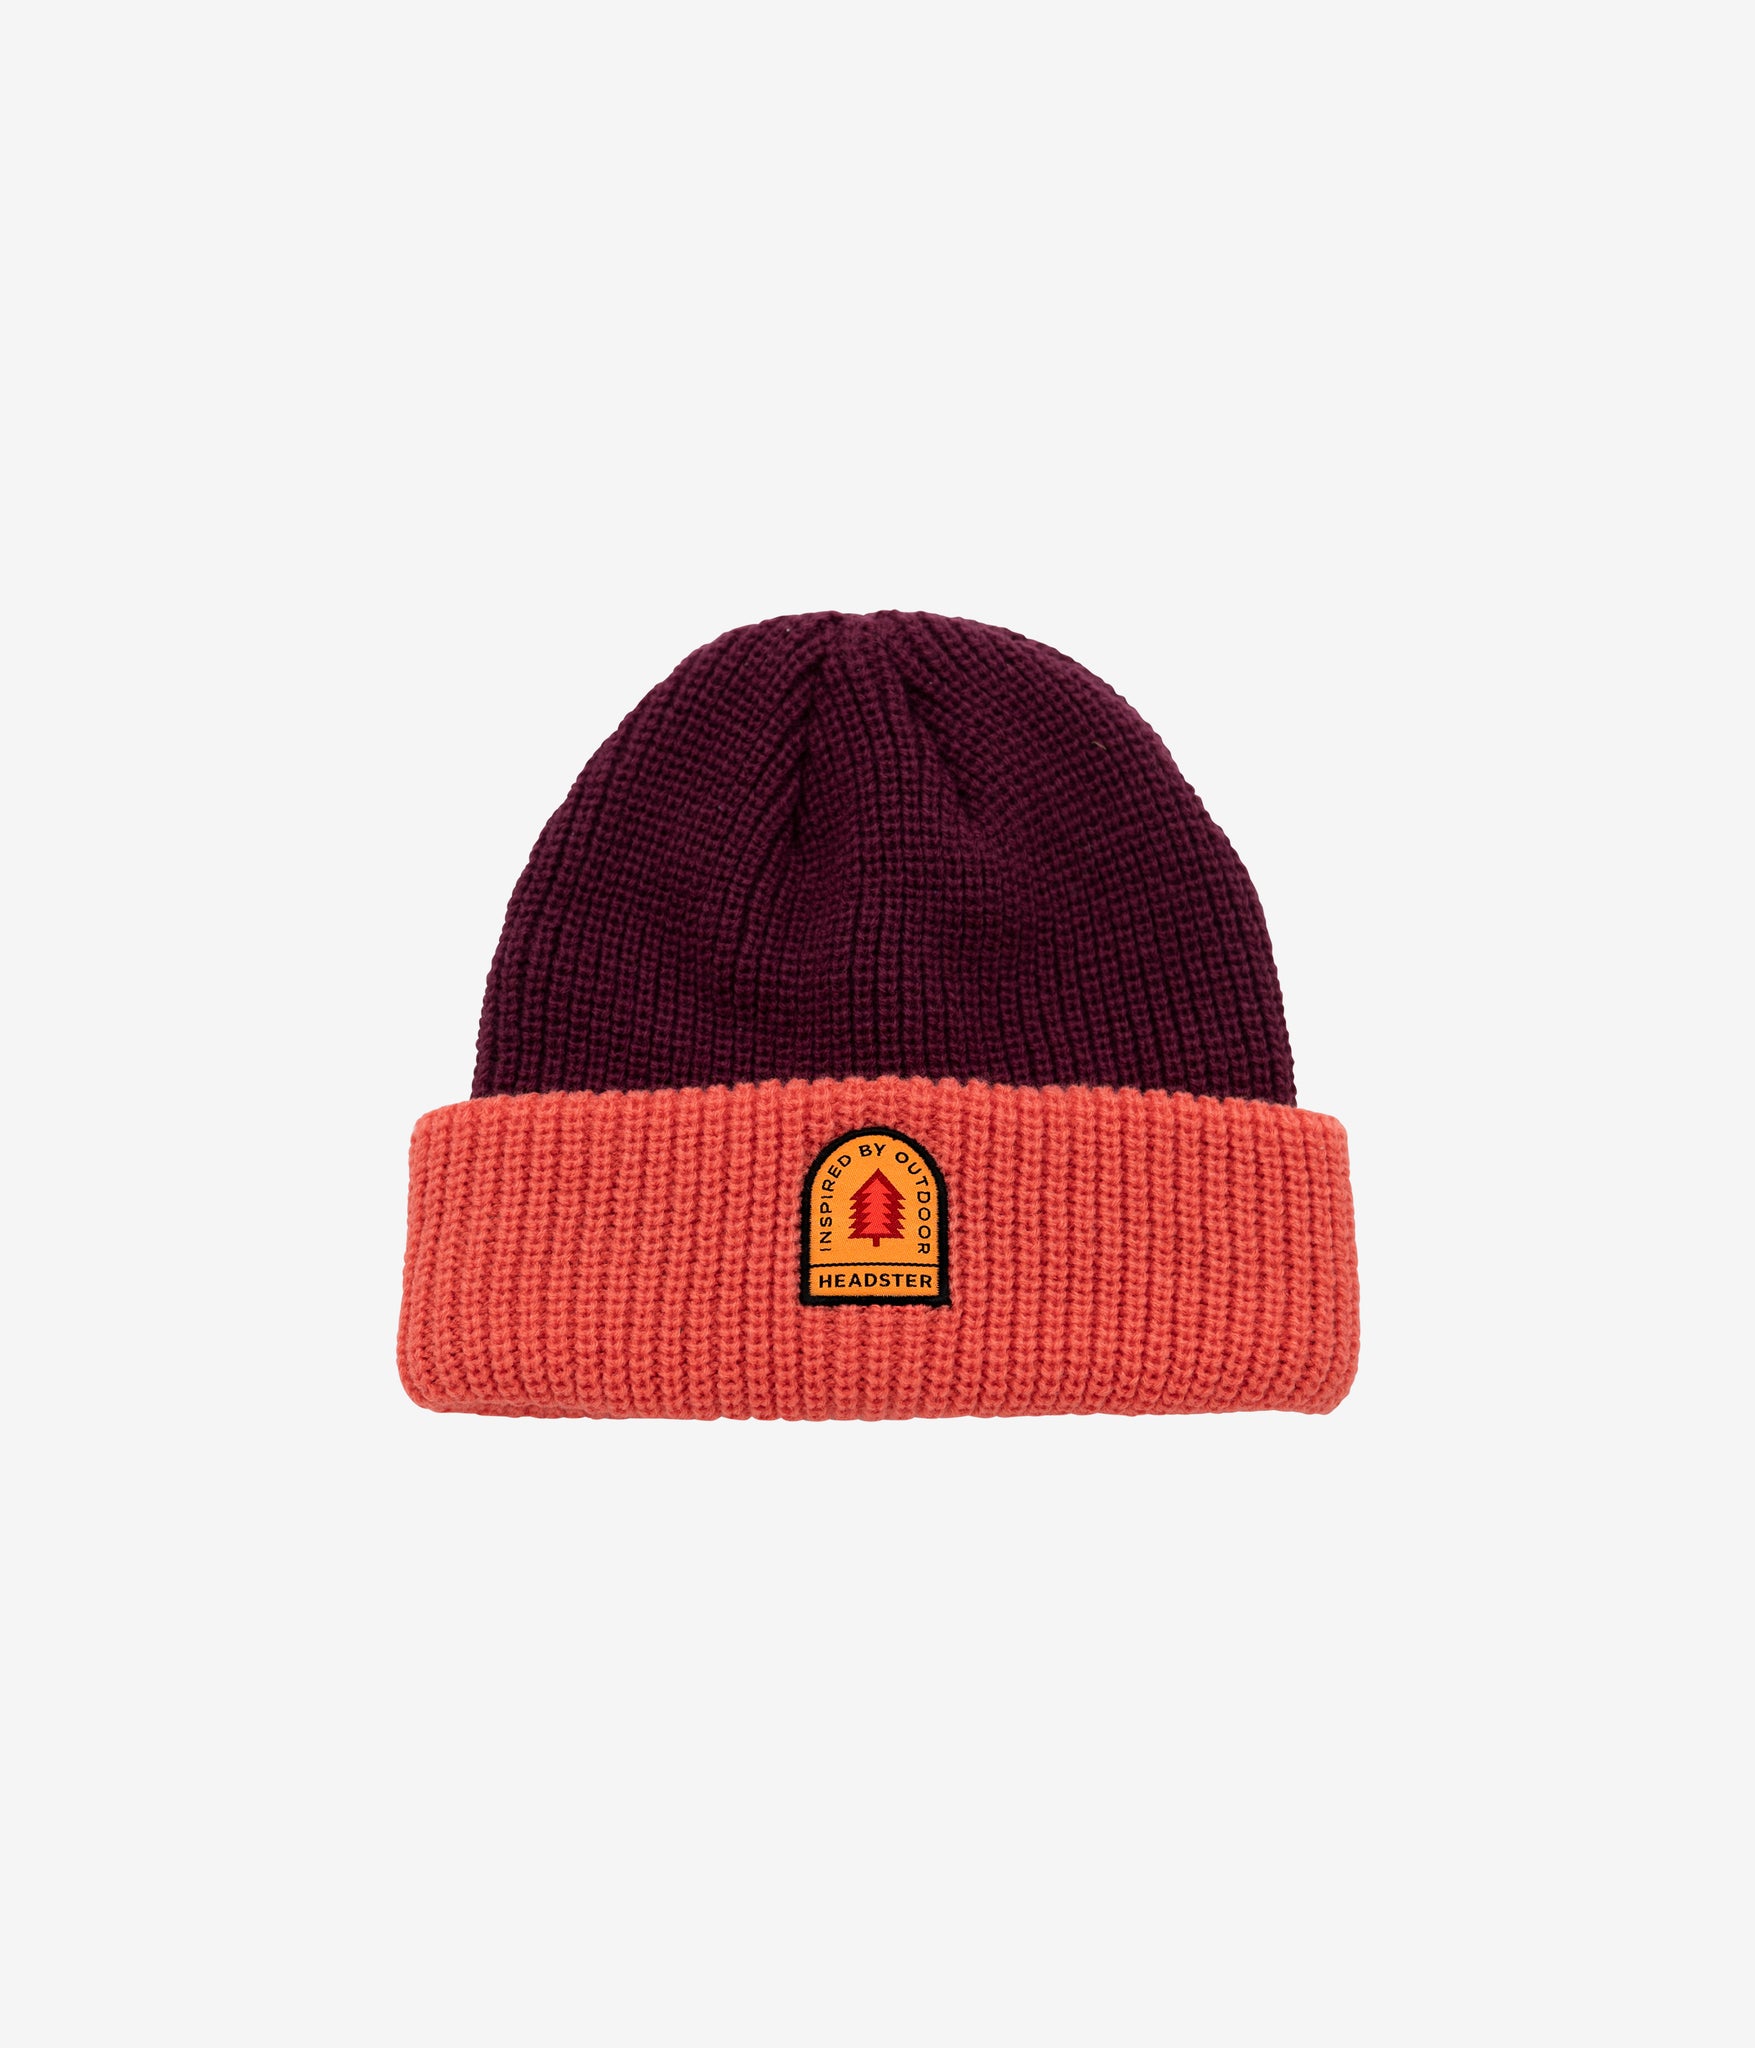 Two Fold outdoor beanie - coral